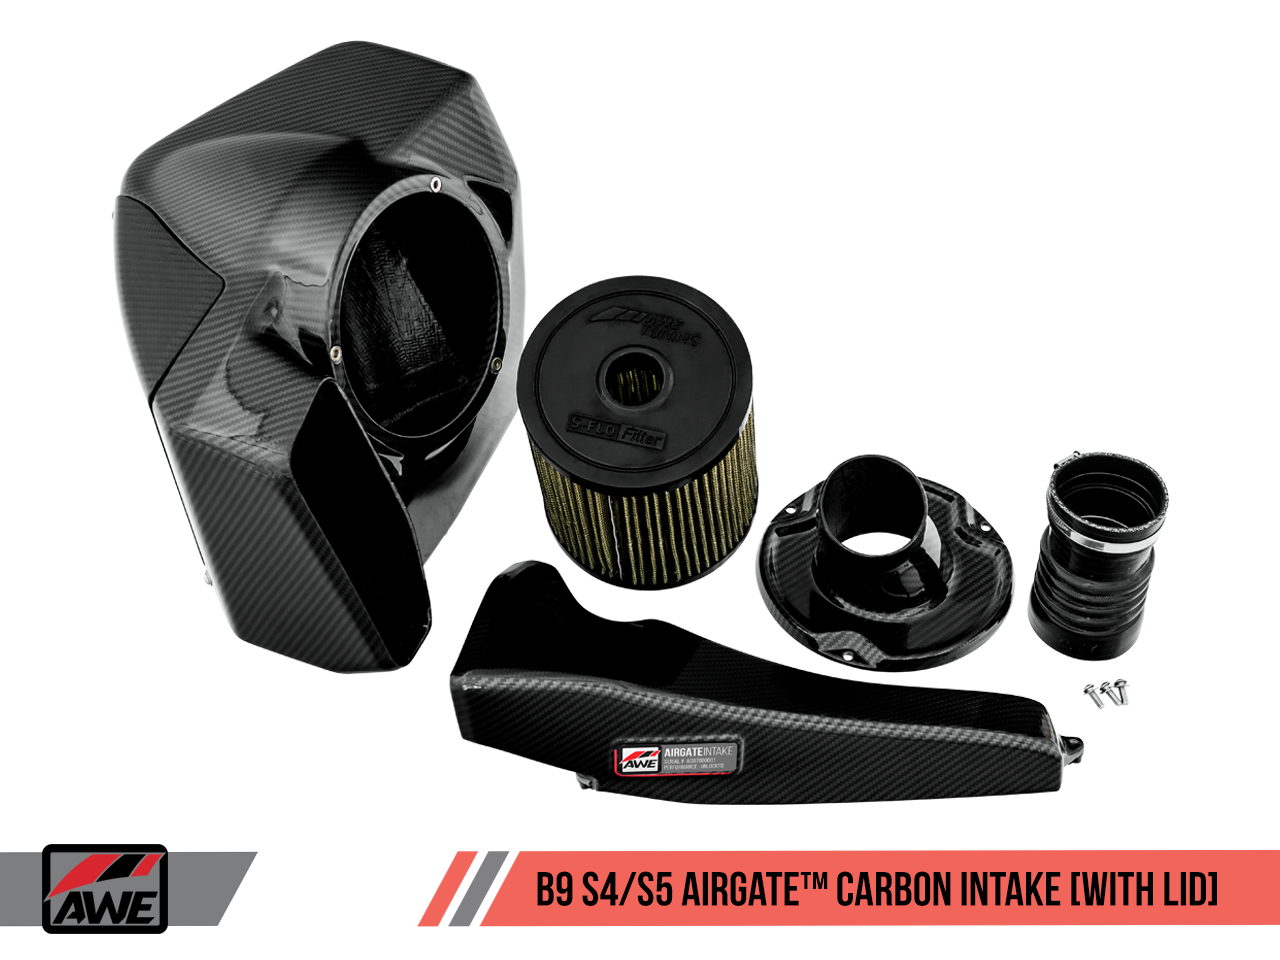 AWE AirGate™ Carbon Fiber Intake For Audi B9 S4 / S5 / RS5 3.0T - With Lid - 0